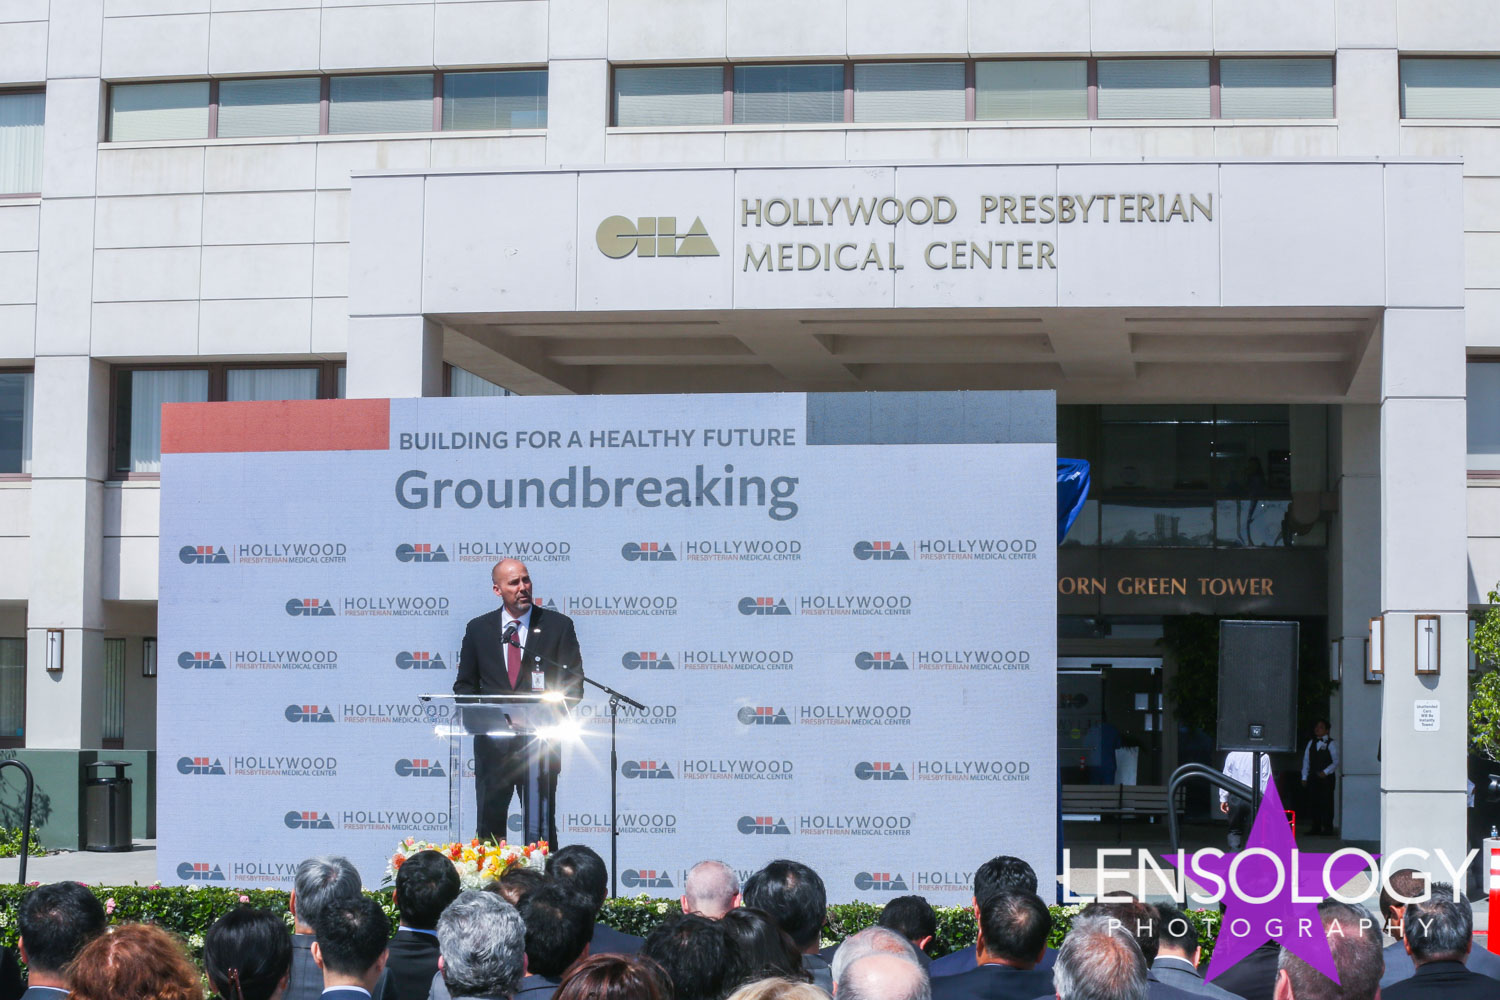 LENSOLOGY.NET - Ground breaking ceremony for new tower at the Hollywood Presbyterian Medical Center, LA, CA.
All images are copyright of Lensology.net
Email: info@lensology.net
www.lensology.net